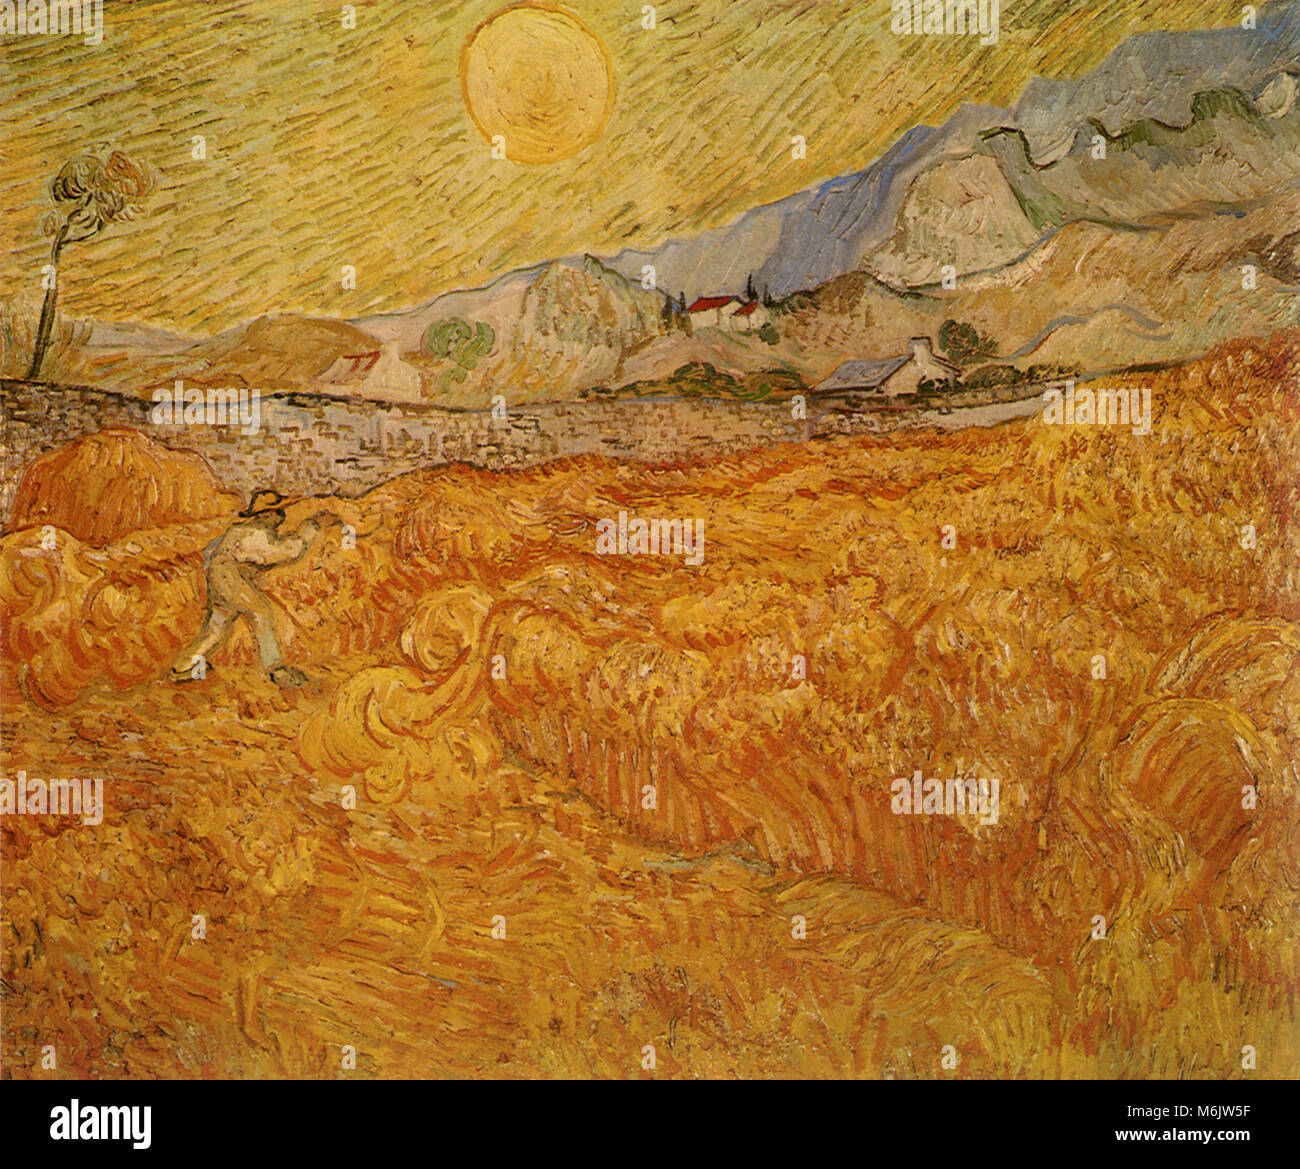 Wheat Field behind Saint-Paul Hospital with a Reaper, Van Gogh, Vincent Willem, 1889. Stock Photo